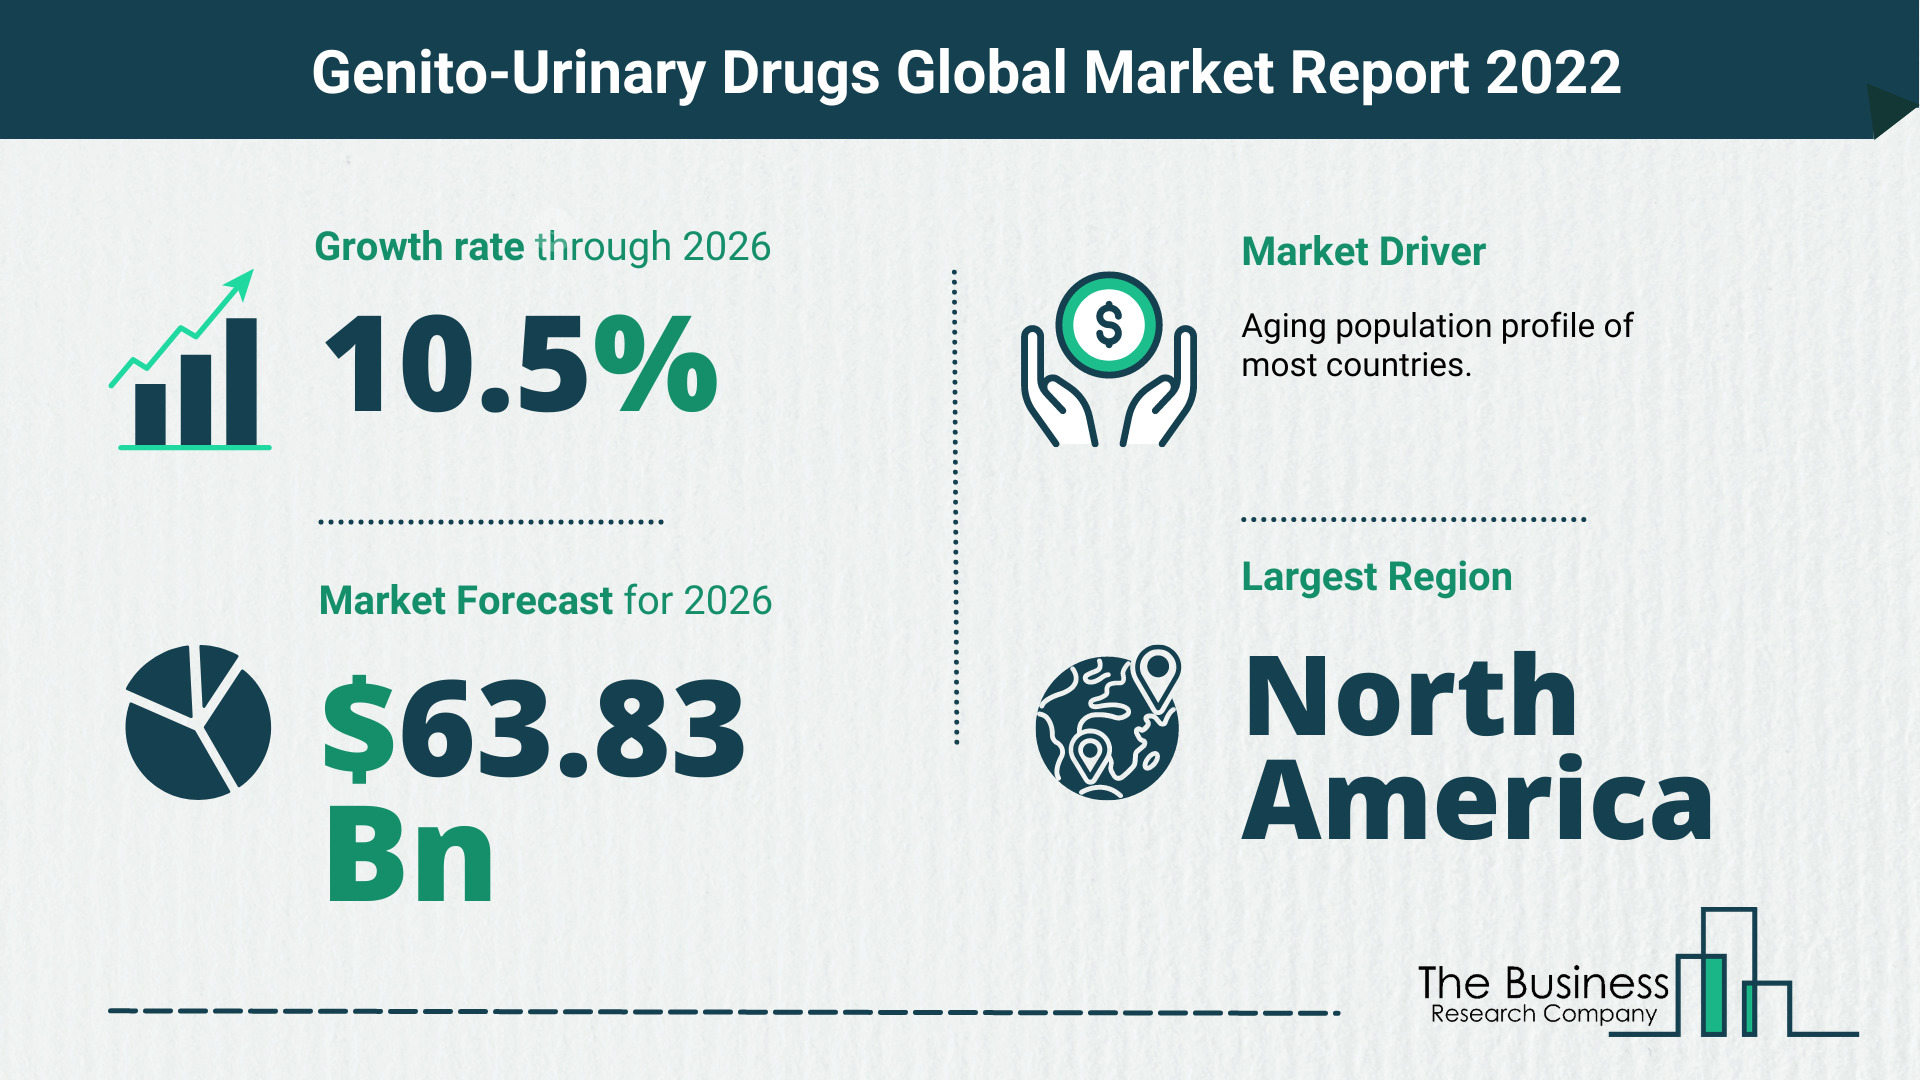 The Genito-Urinary Drugs Market Share, Market Size, And Growth Rate 2022